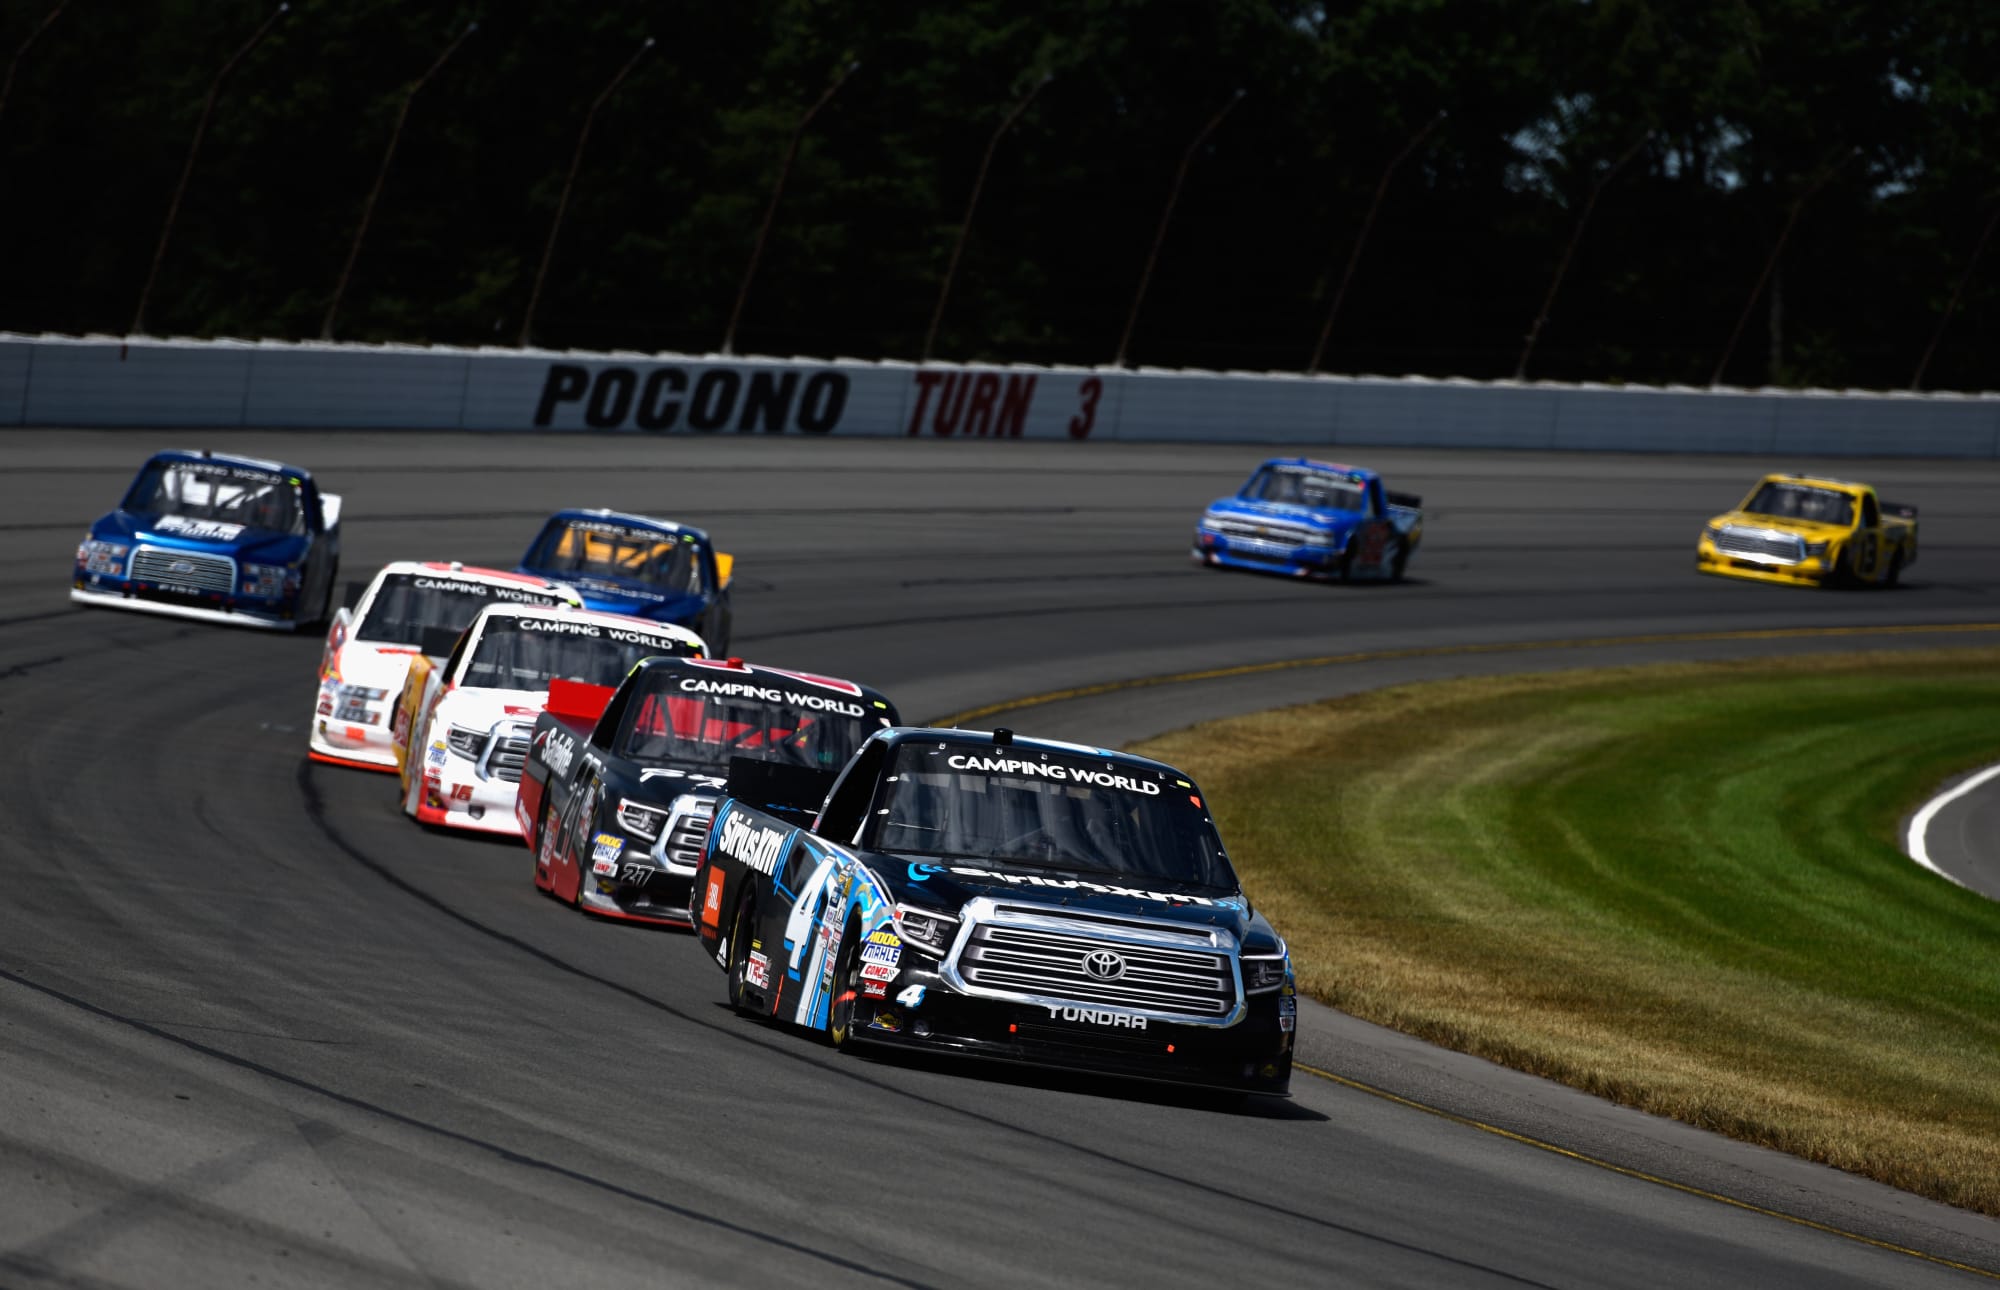 NASCAR Truck Series Championship Standings After Pocono